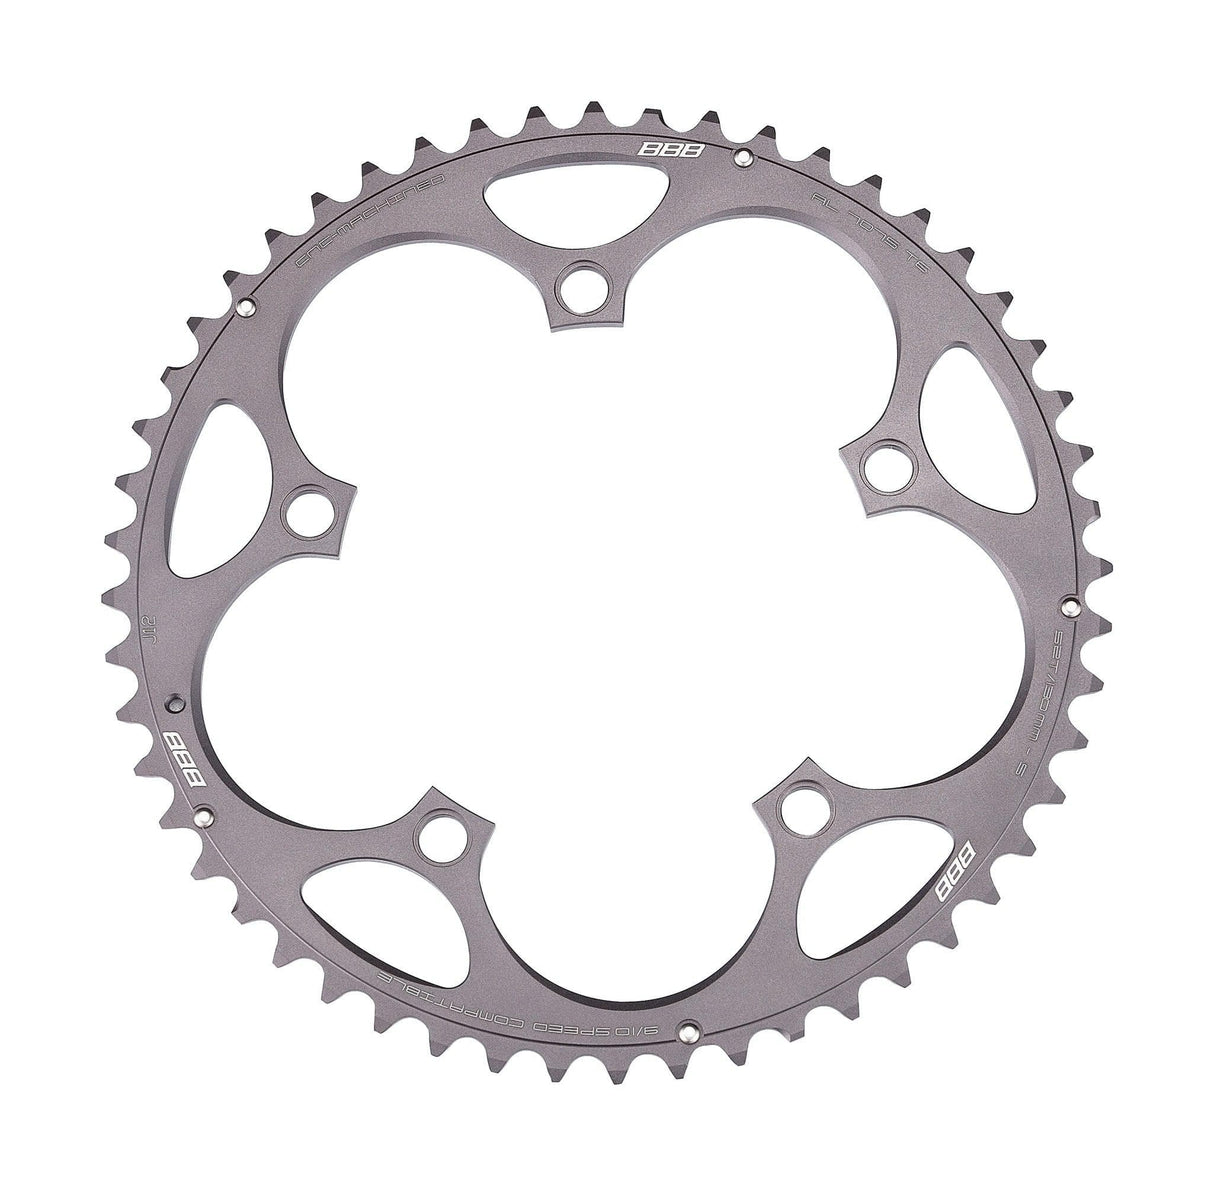 BBB BCR-11S - RoadGear Chainring (S9/10, 130BCD, 52T)